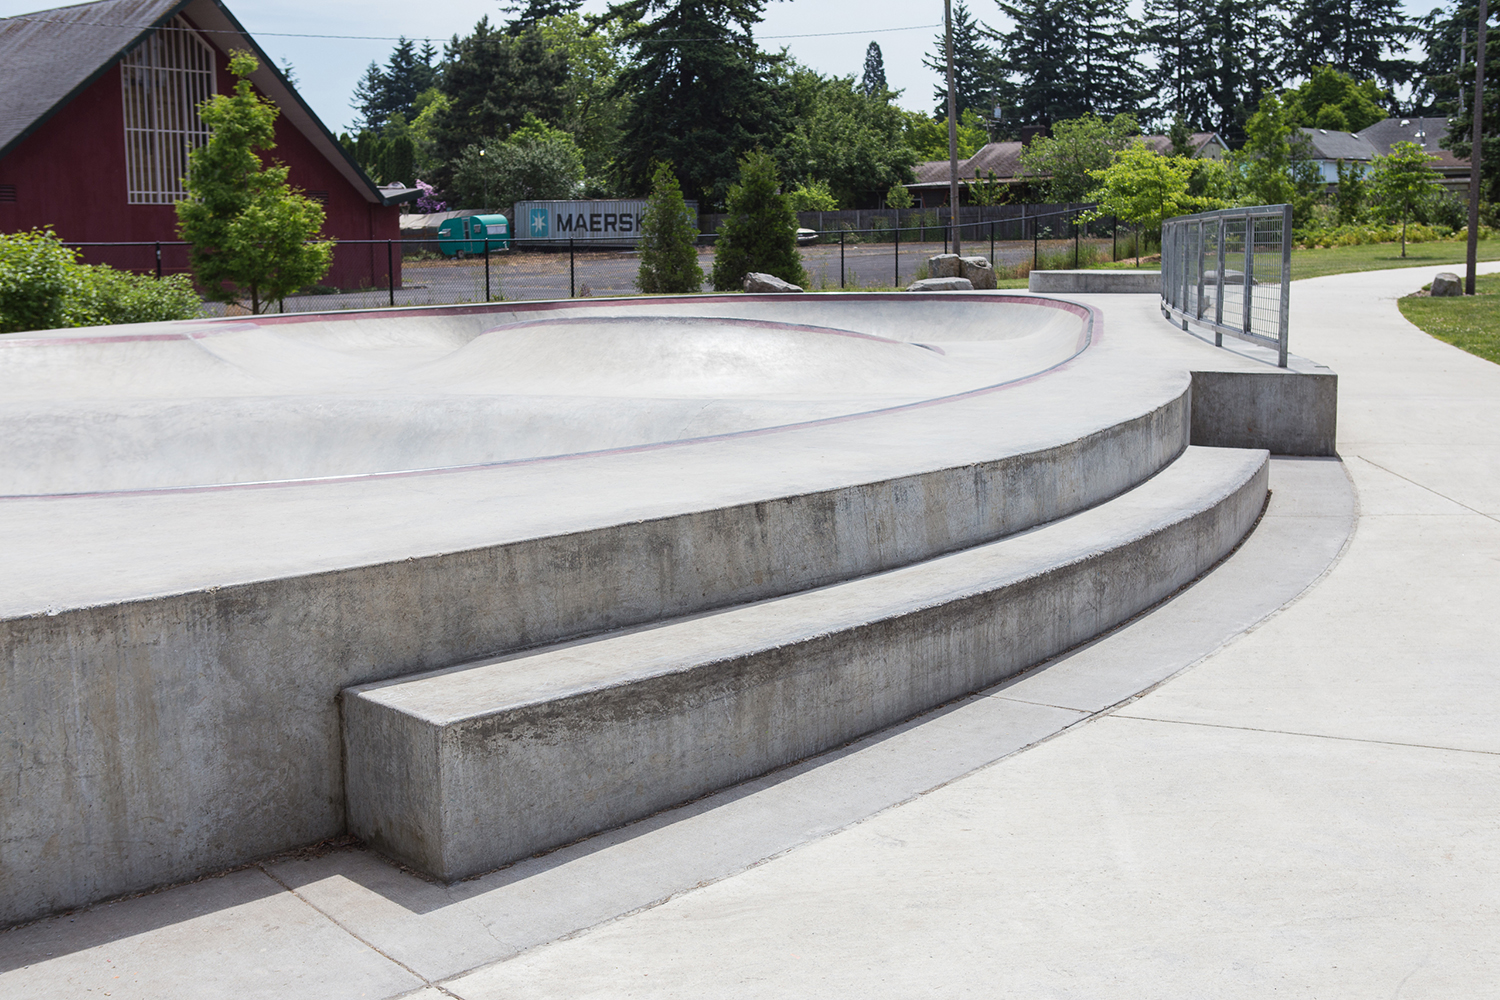  The outer ledge section of the Alberta Skate Spot is an attraction for street skaters. 